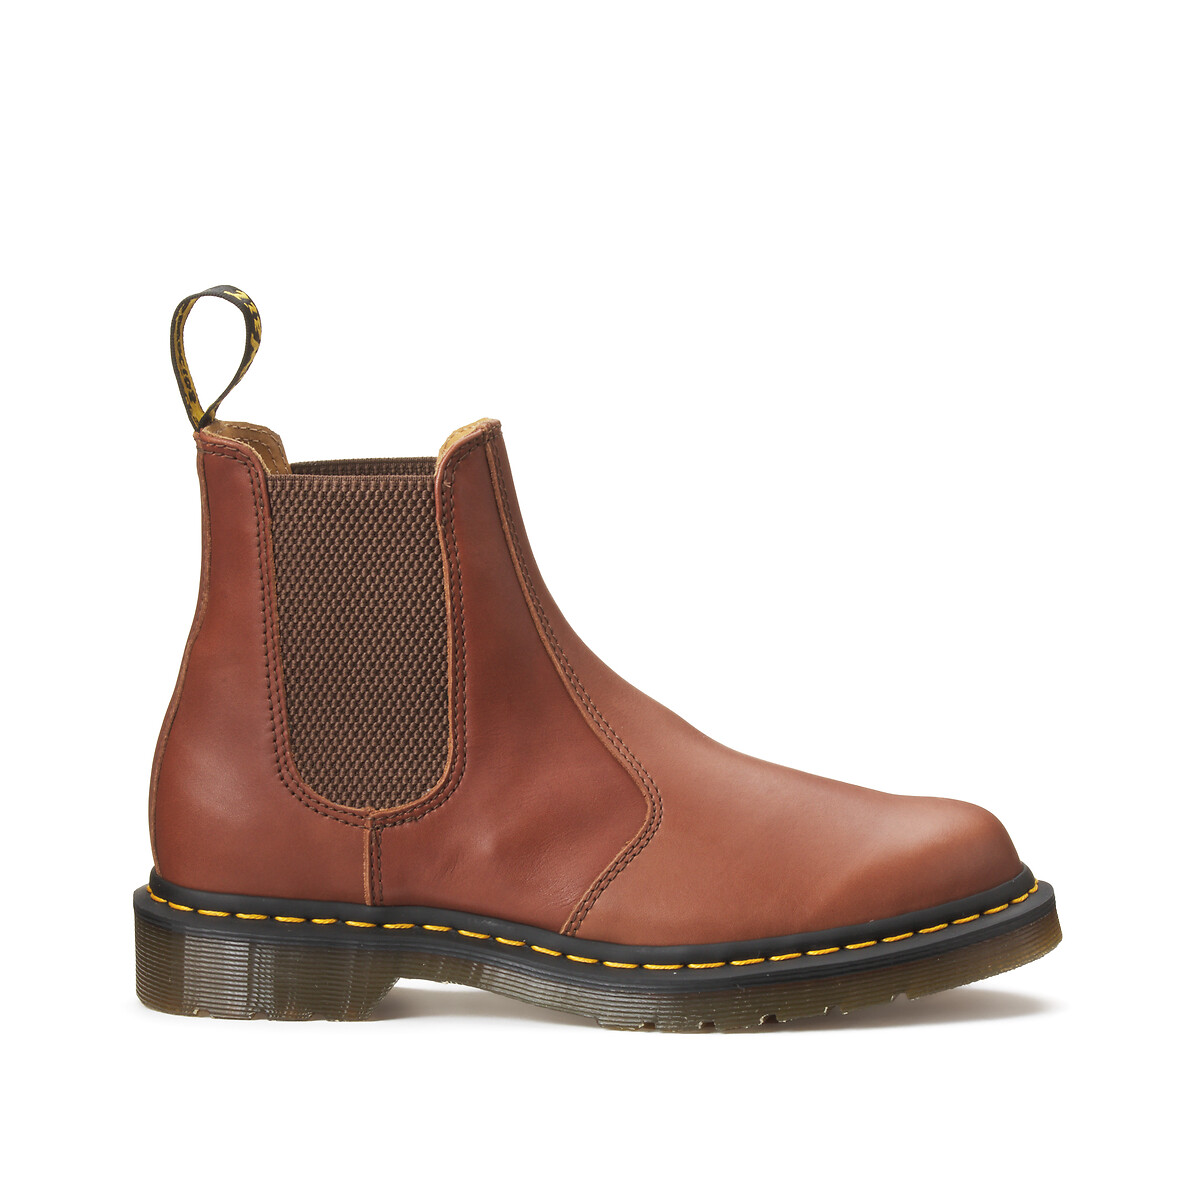 Image of Carrara 2976 Chelsea Boots in Leather